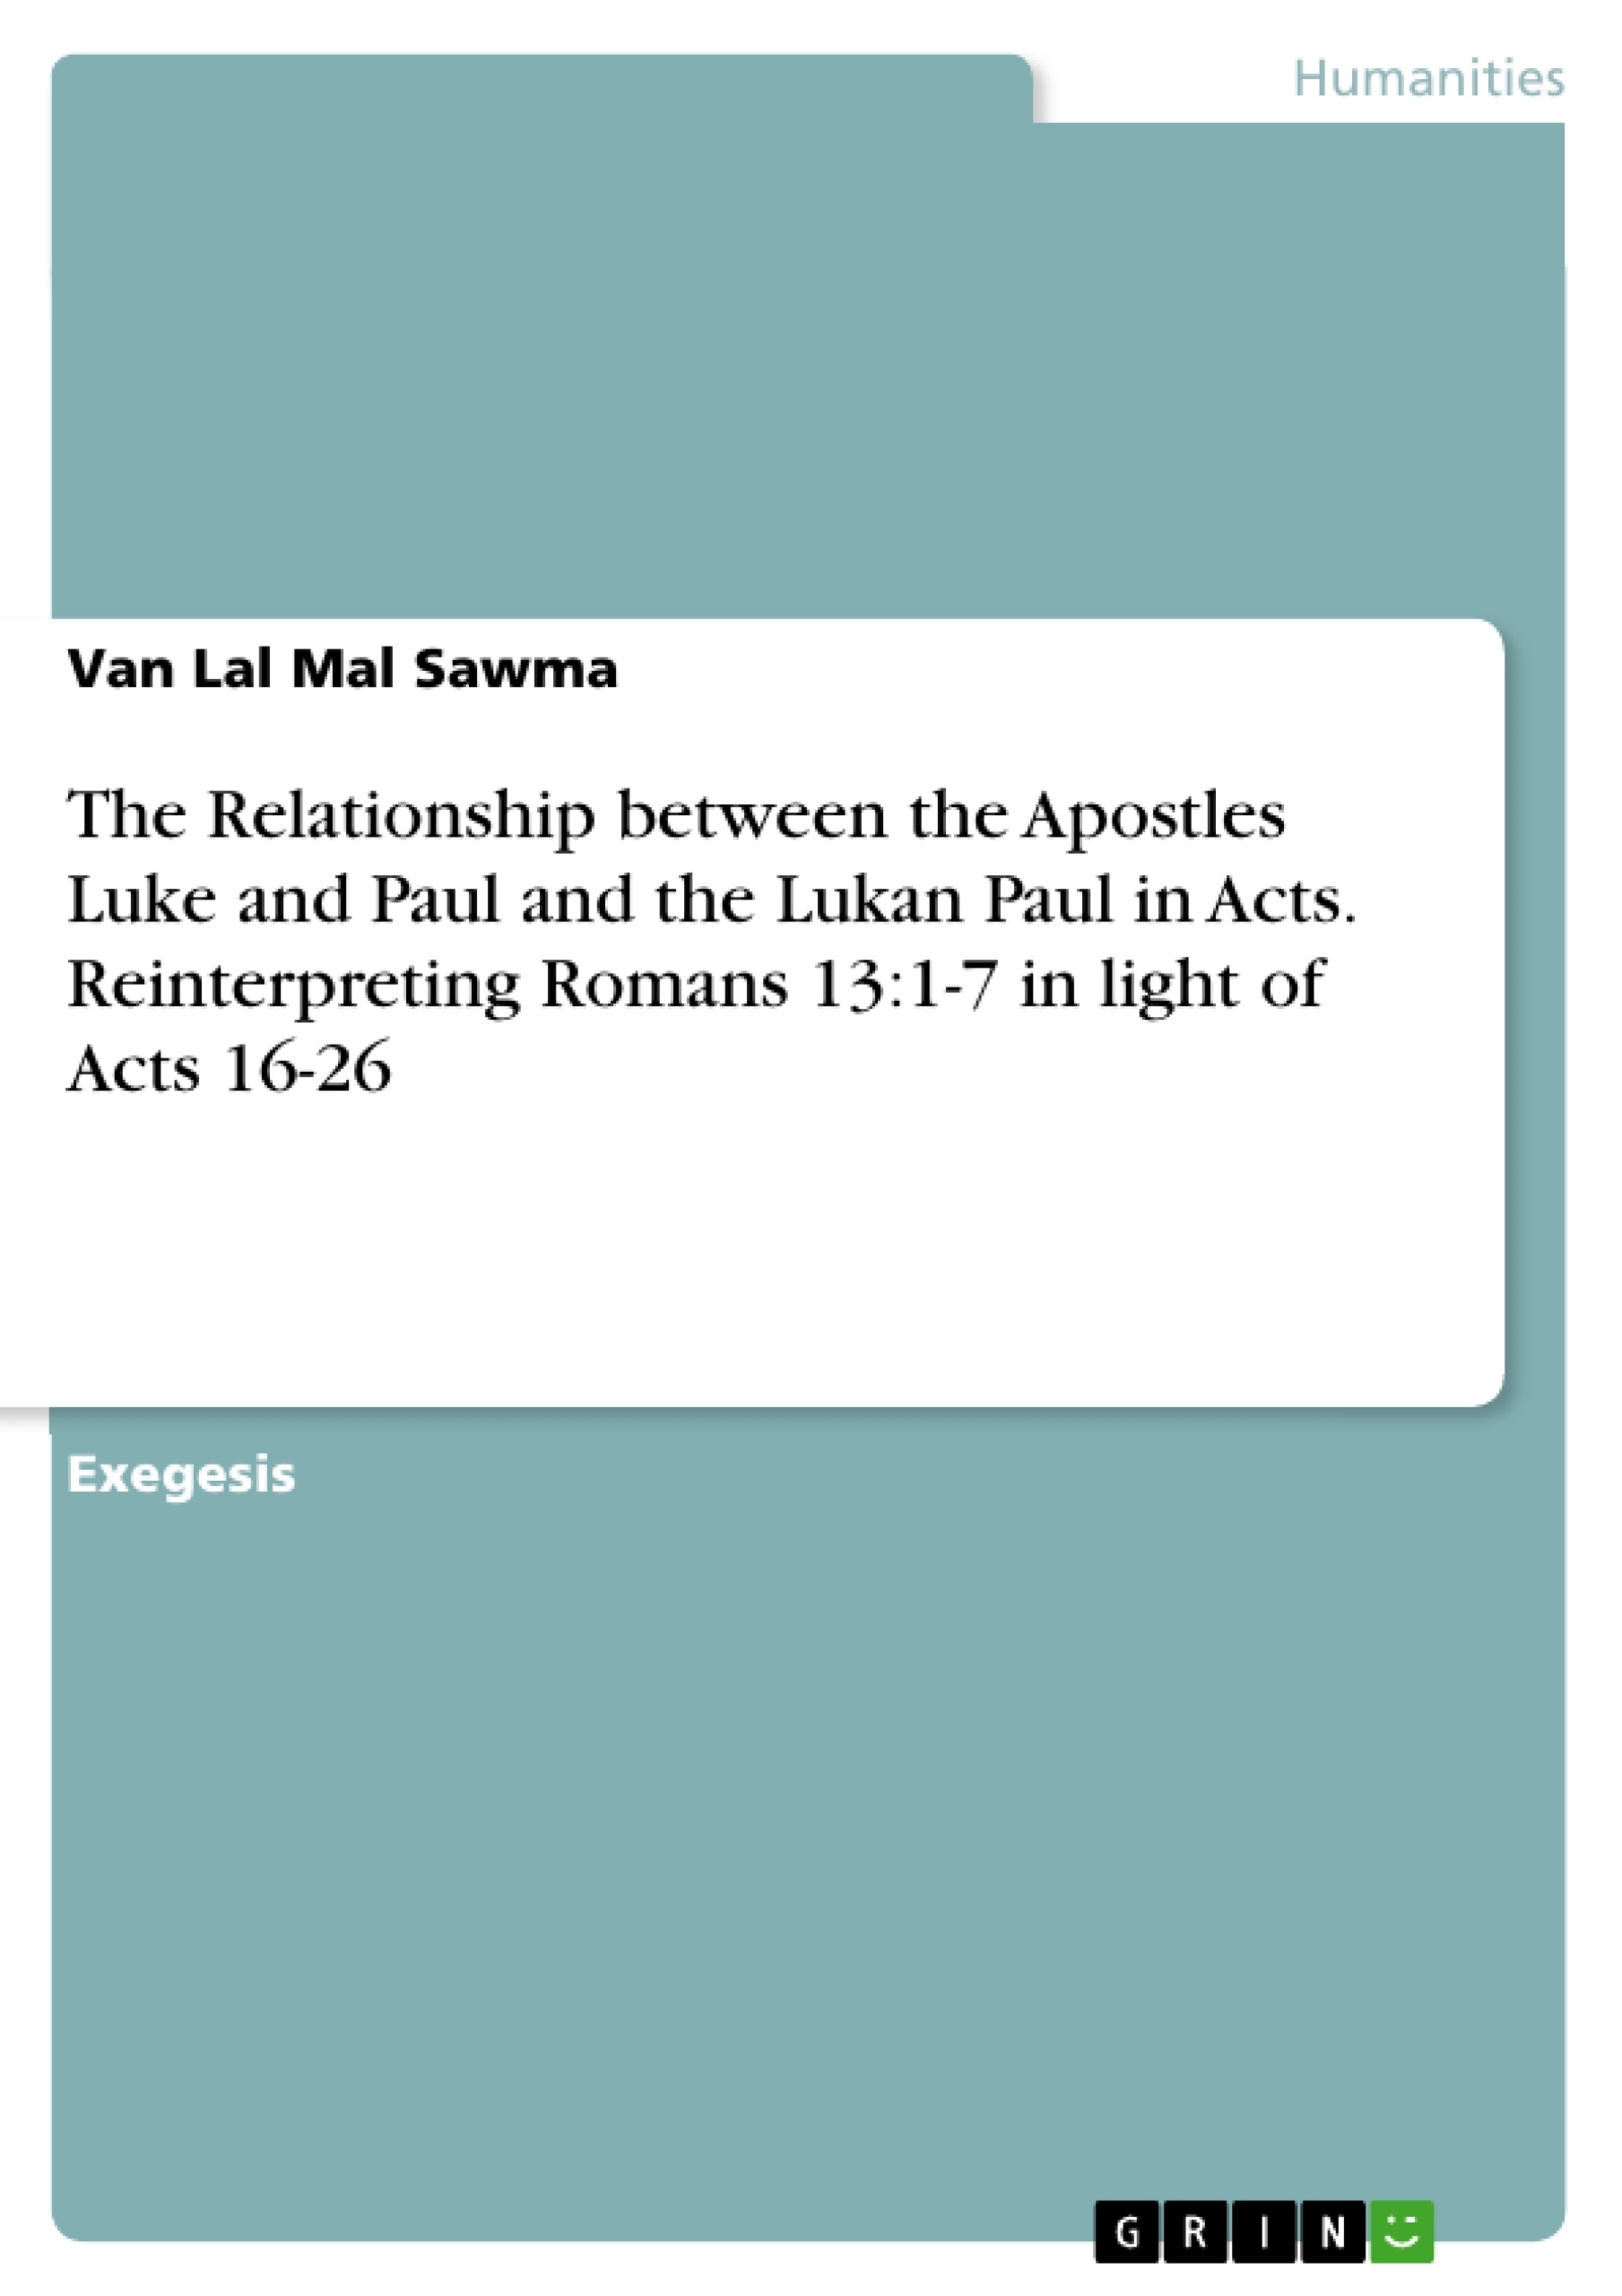 Titre: The Relationship between the Apostles Luke and Paul and the Lukan Paul in Acts. Reinterpreting Romans 13:1-7 in light of Acts 16-26